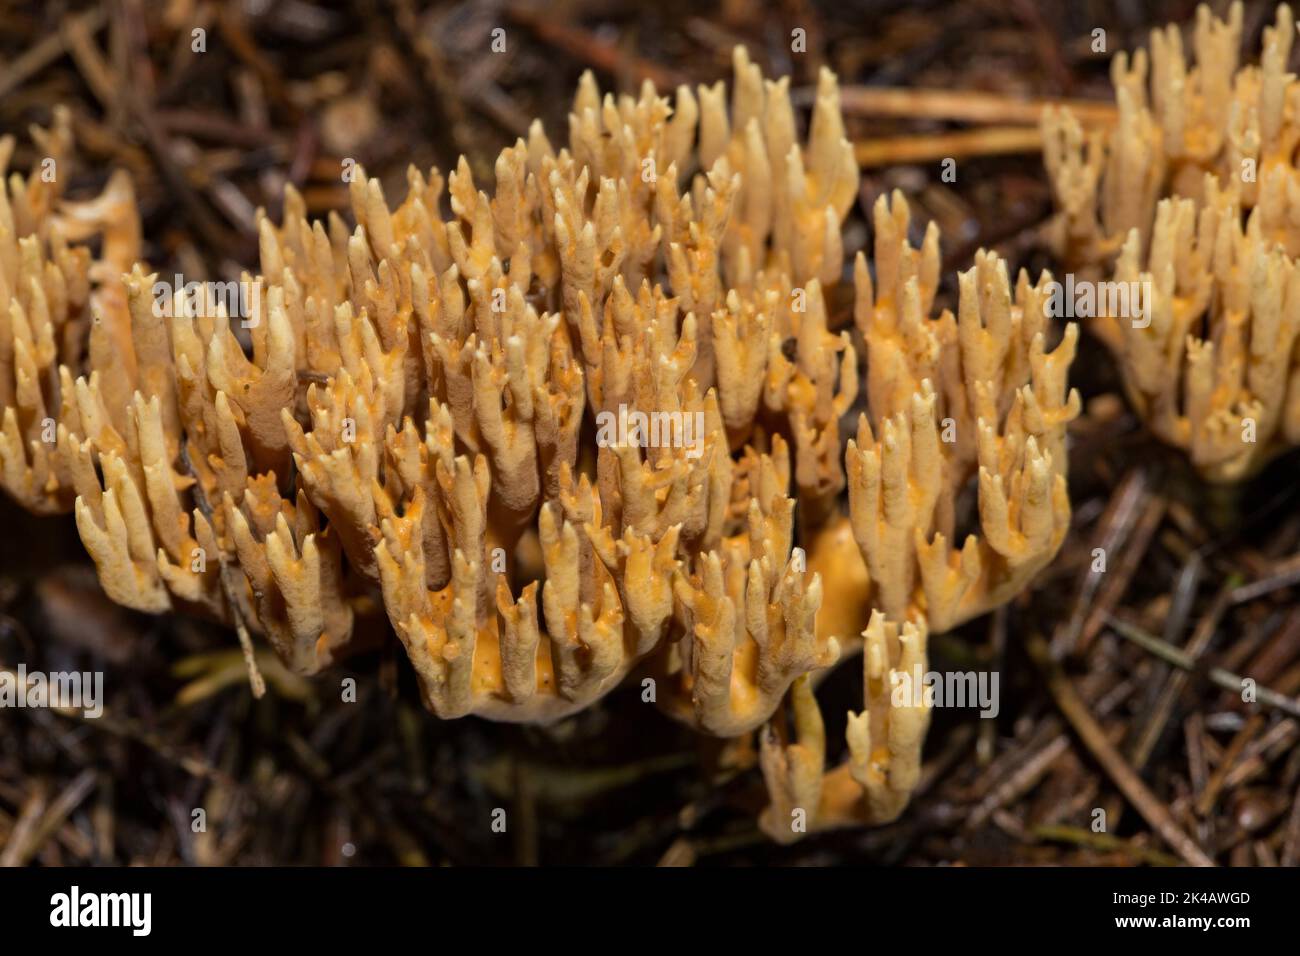 Flattish coral Fruiting bodies with many stalk-like yellowish-ochre branches next to each other in needle litter Stock Photo